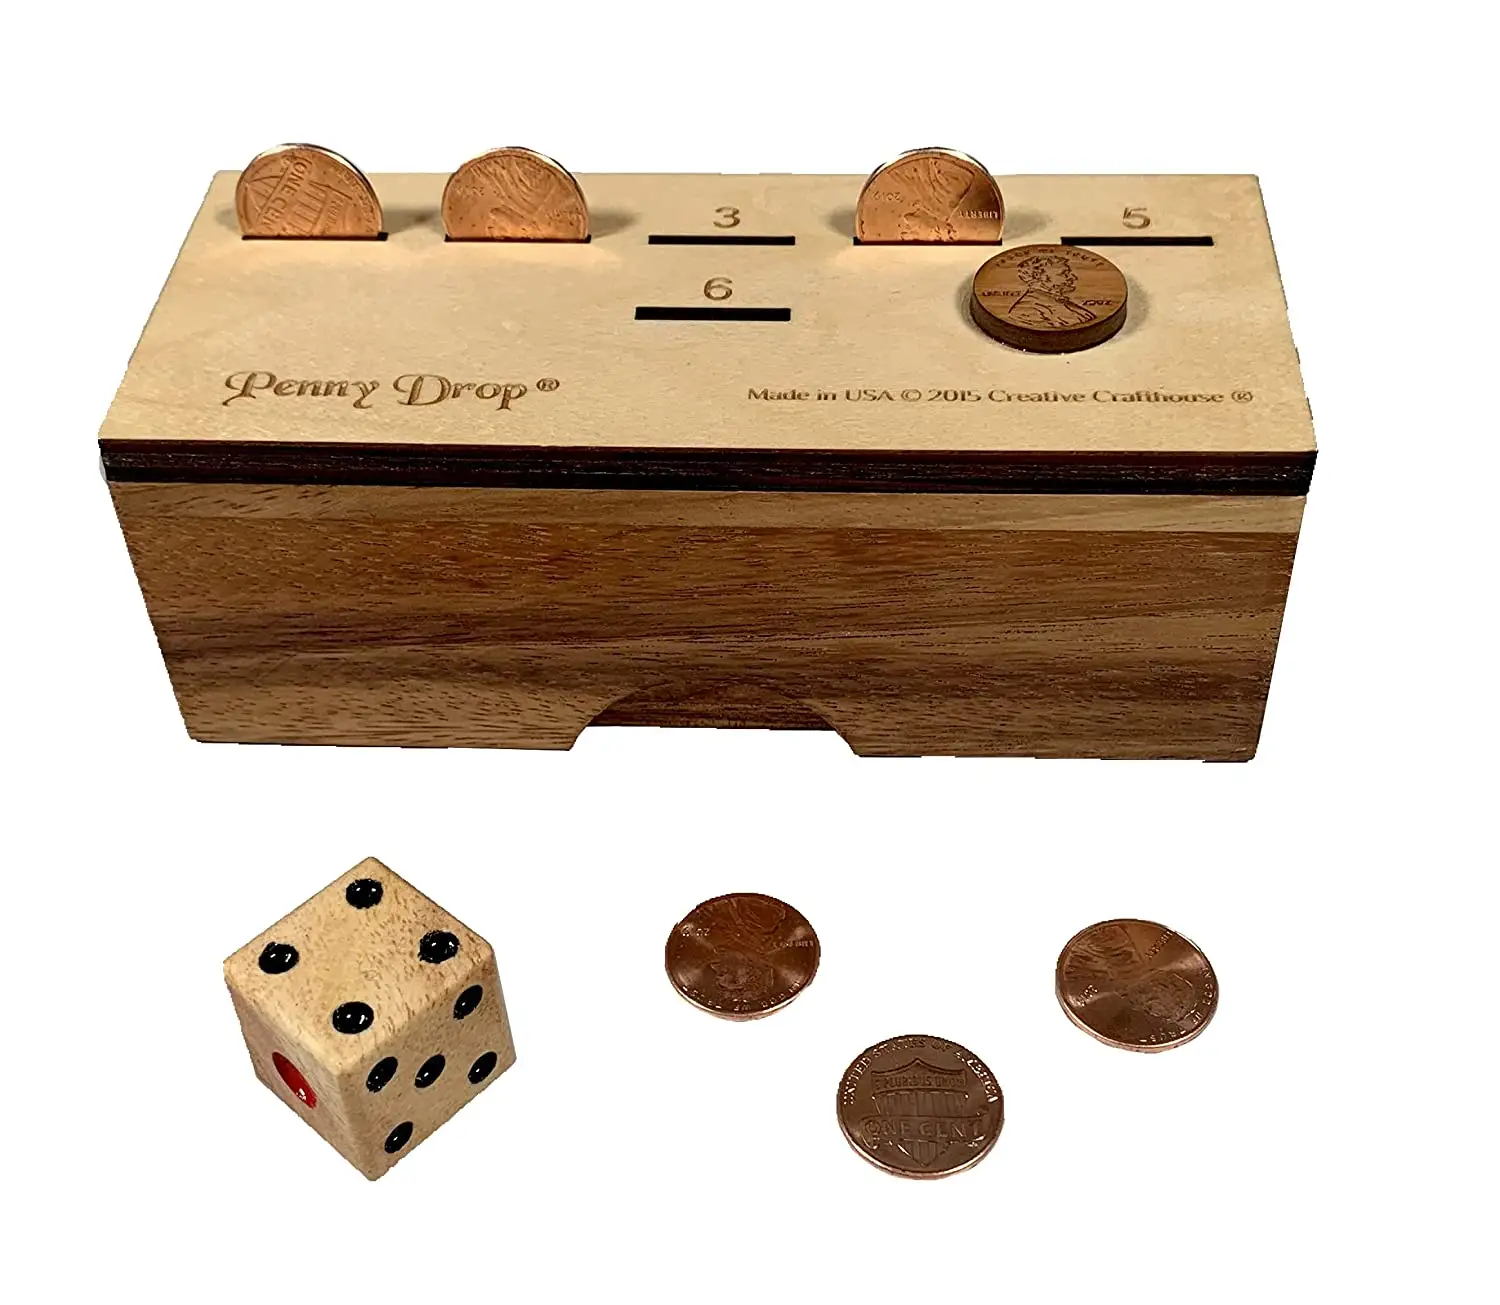 JUNJI Penny Drop Box Economy Version Games Creative Crafthouse Family And Friends Game Tabletop Coin Drop Dice Game